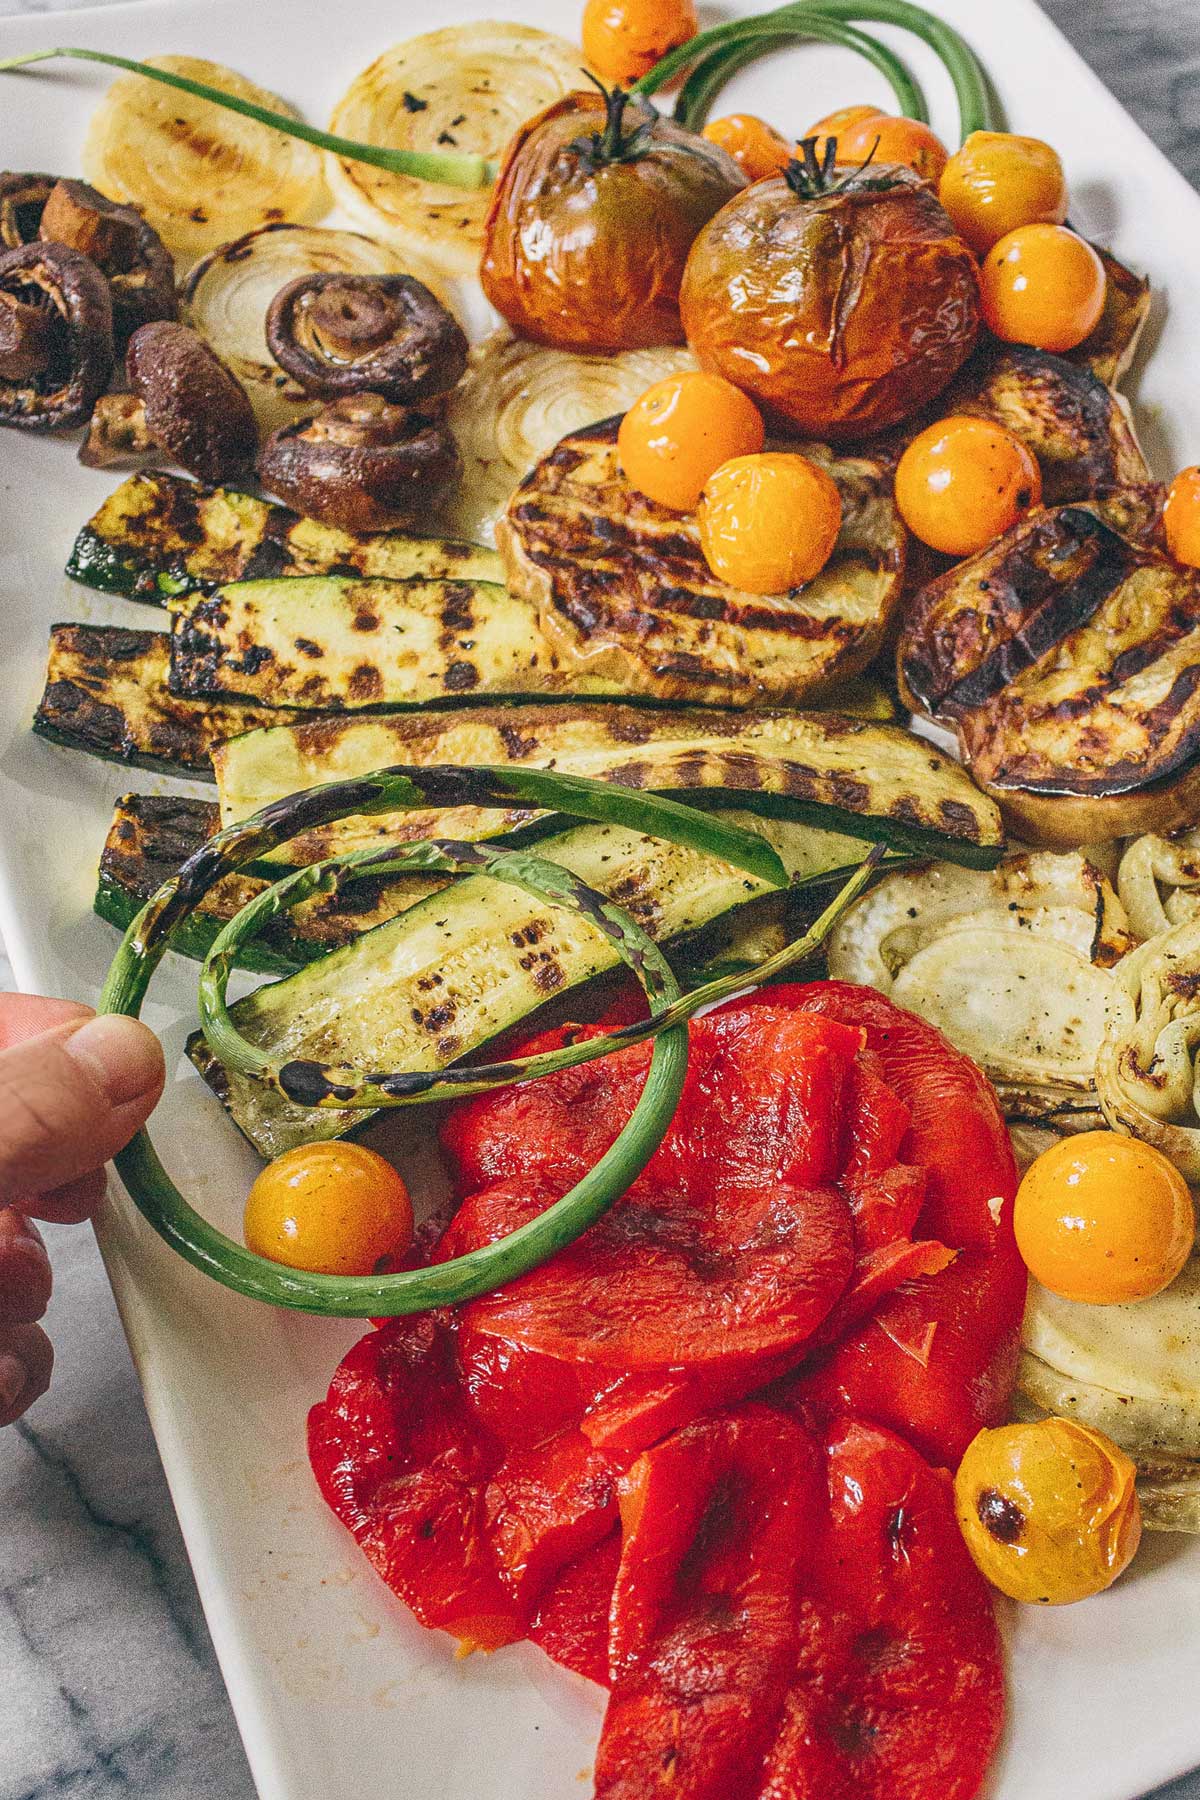 A platter of grilled summer vegetables: zucchini, red peppers, onions, mushrooms, eggplant, tomatoes, garlic scapes